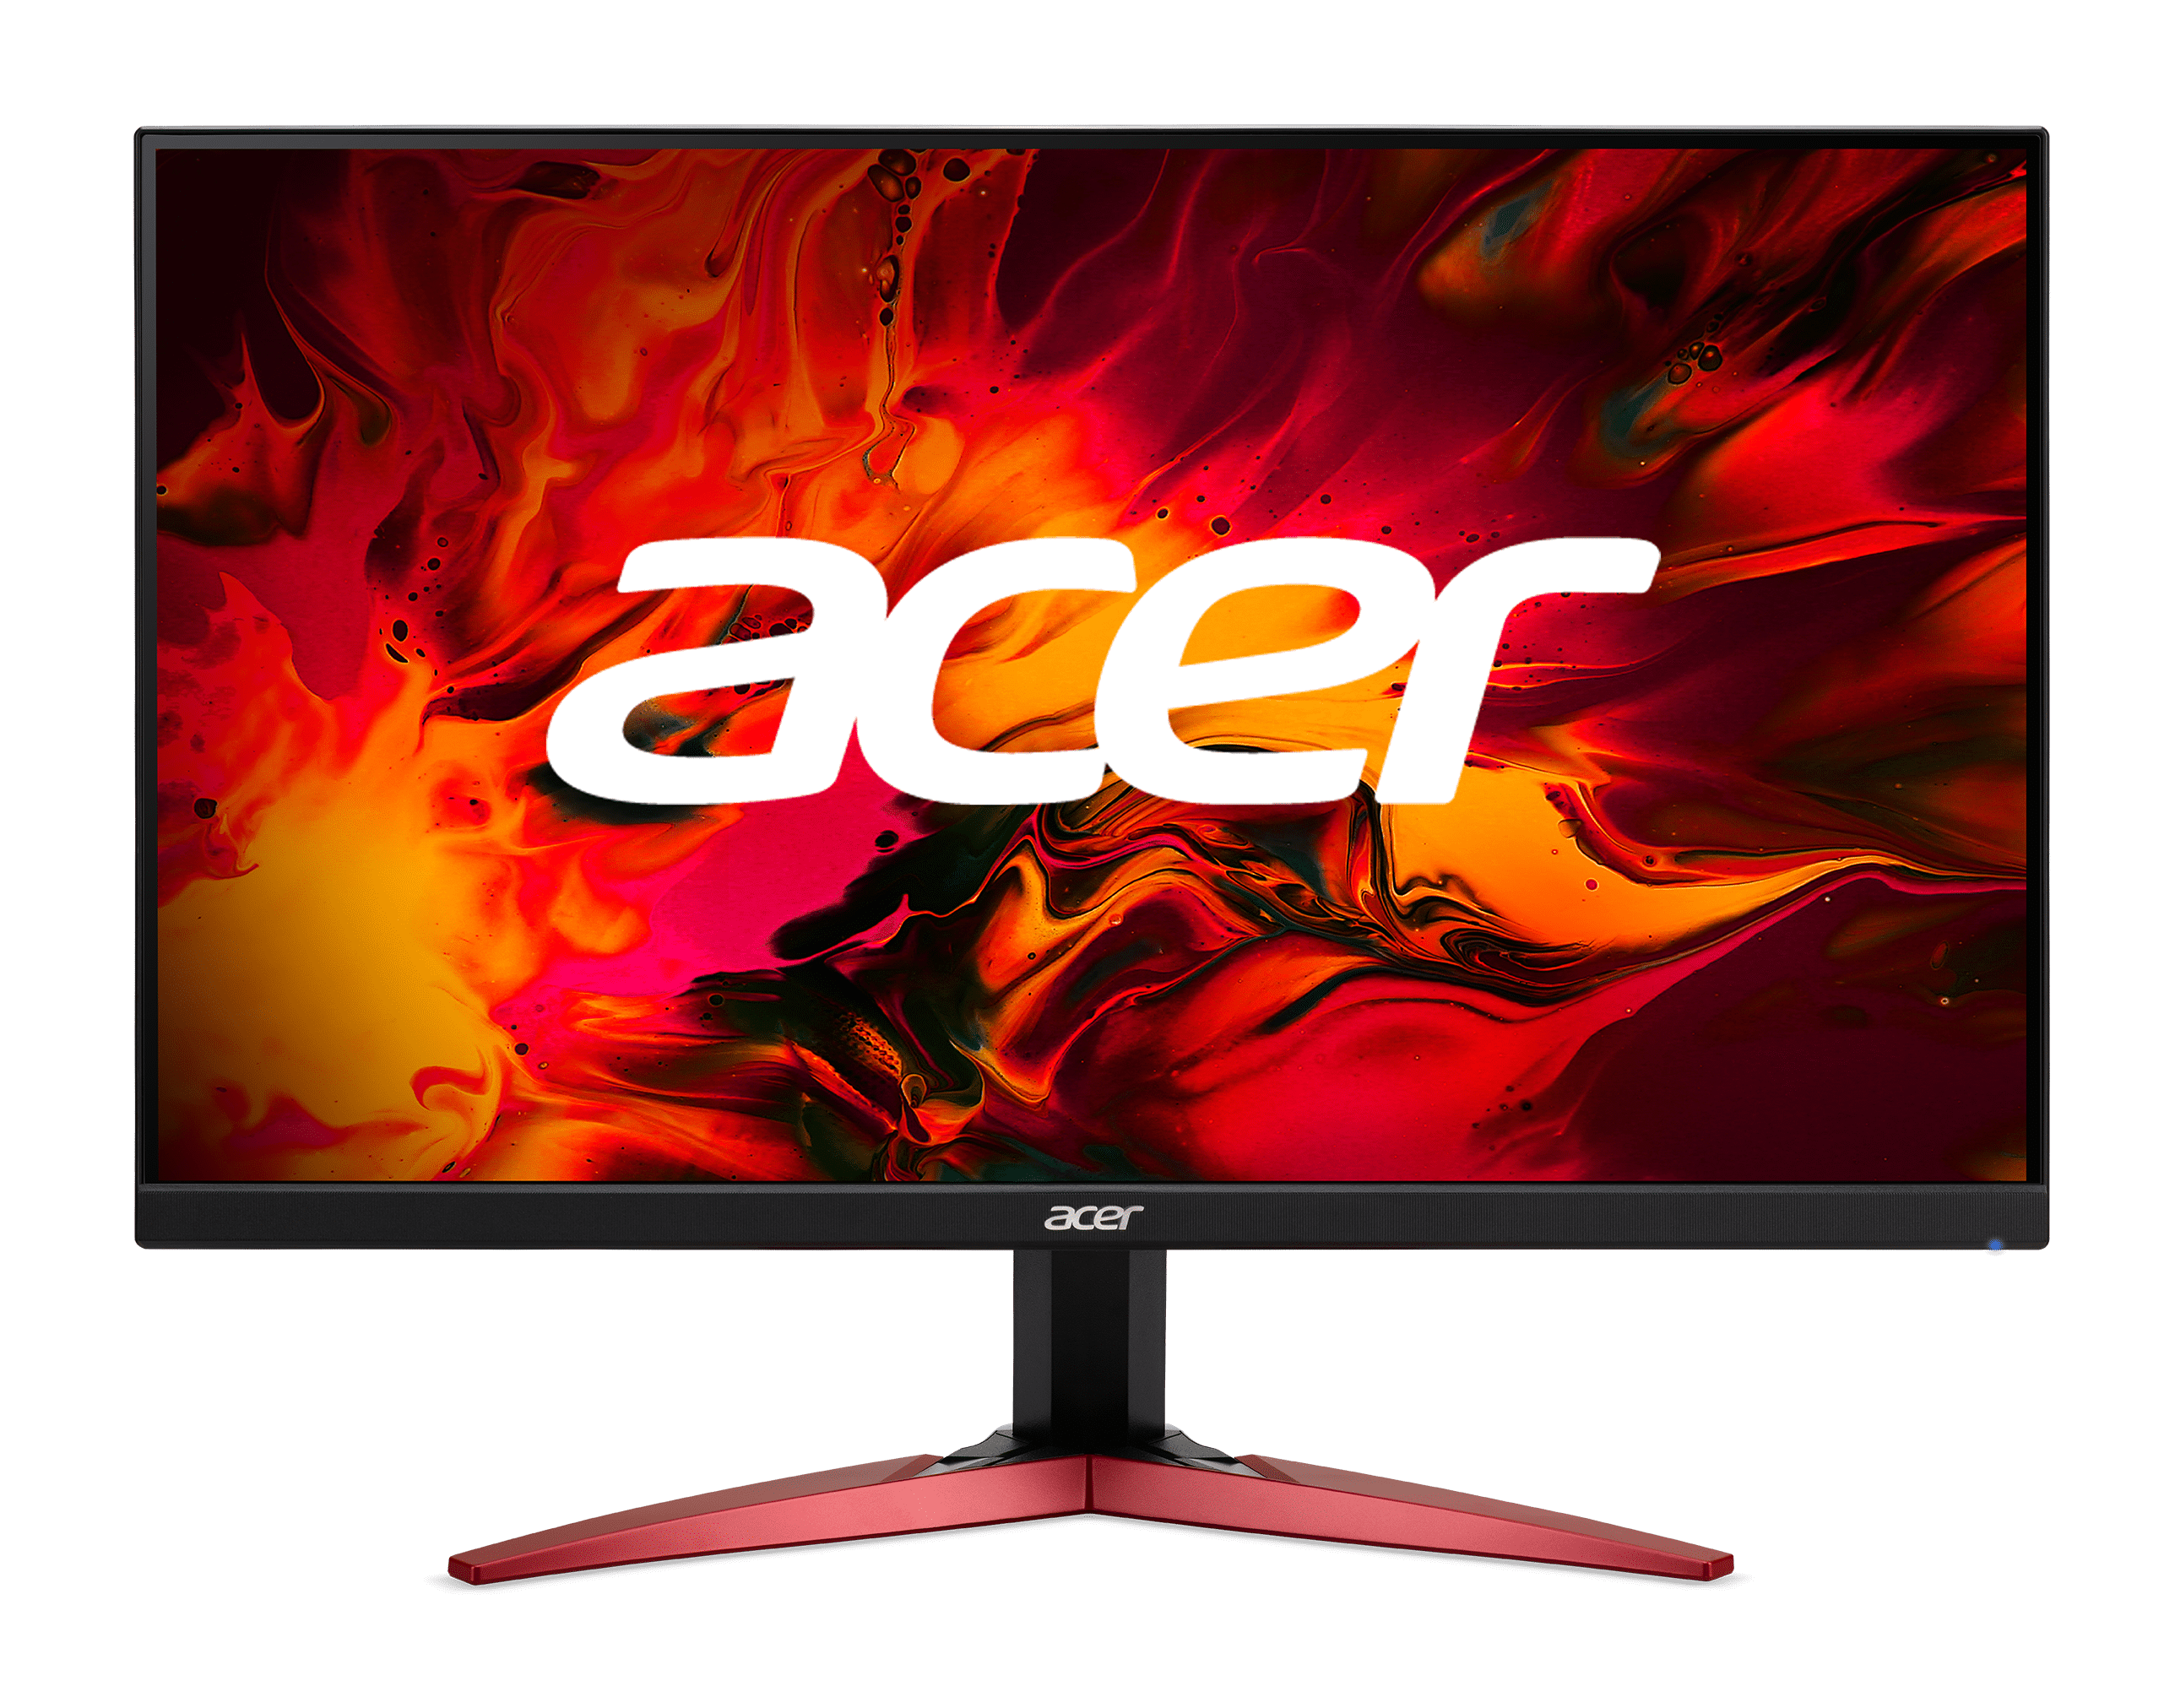 Acer 24.5” Full HD (1920 x 1080) Gaming Monitor with AMD FreeSync,165Hz,  1ms (VRB), KG251Q Sbiip